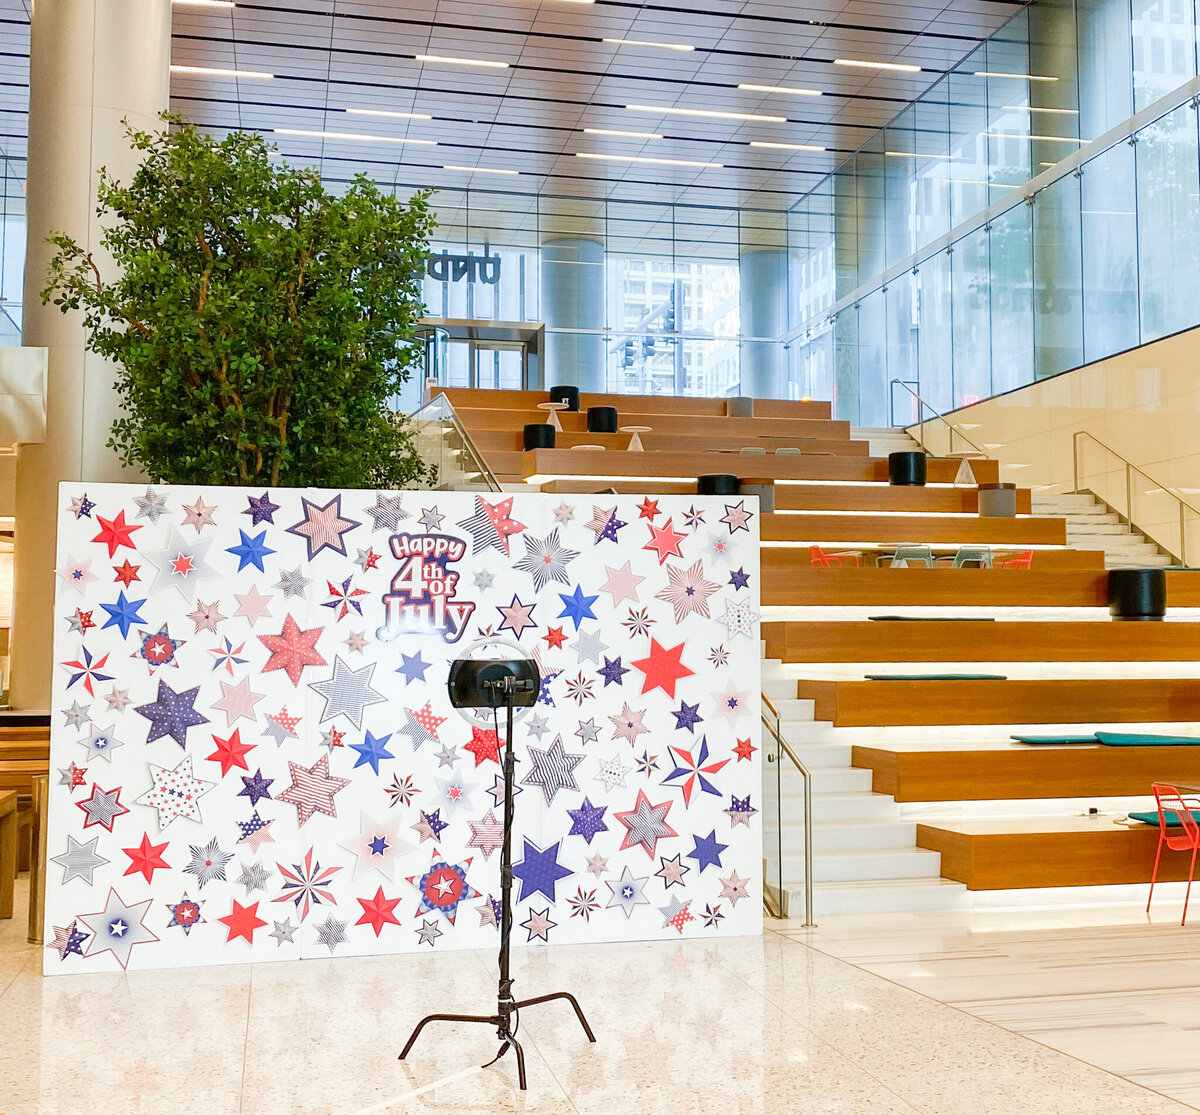 July 4th red, white and blue photo booth backdrop for corporate event